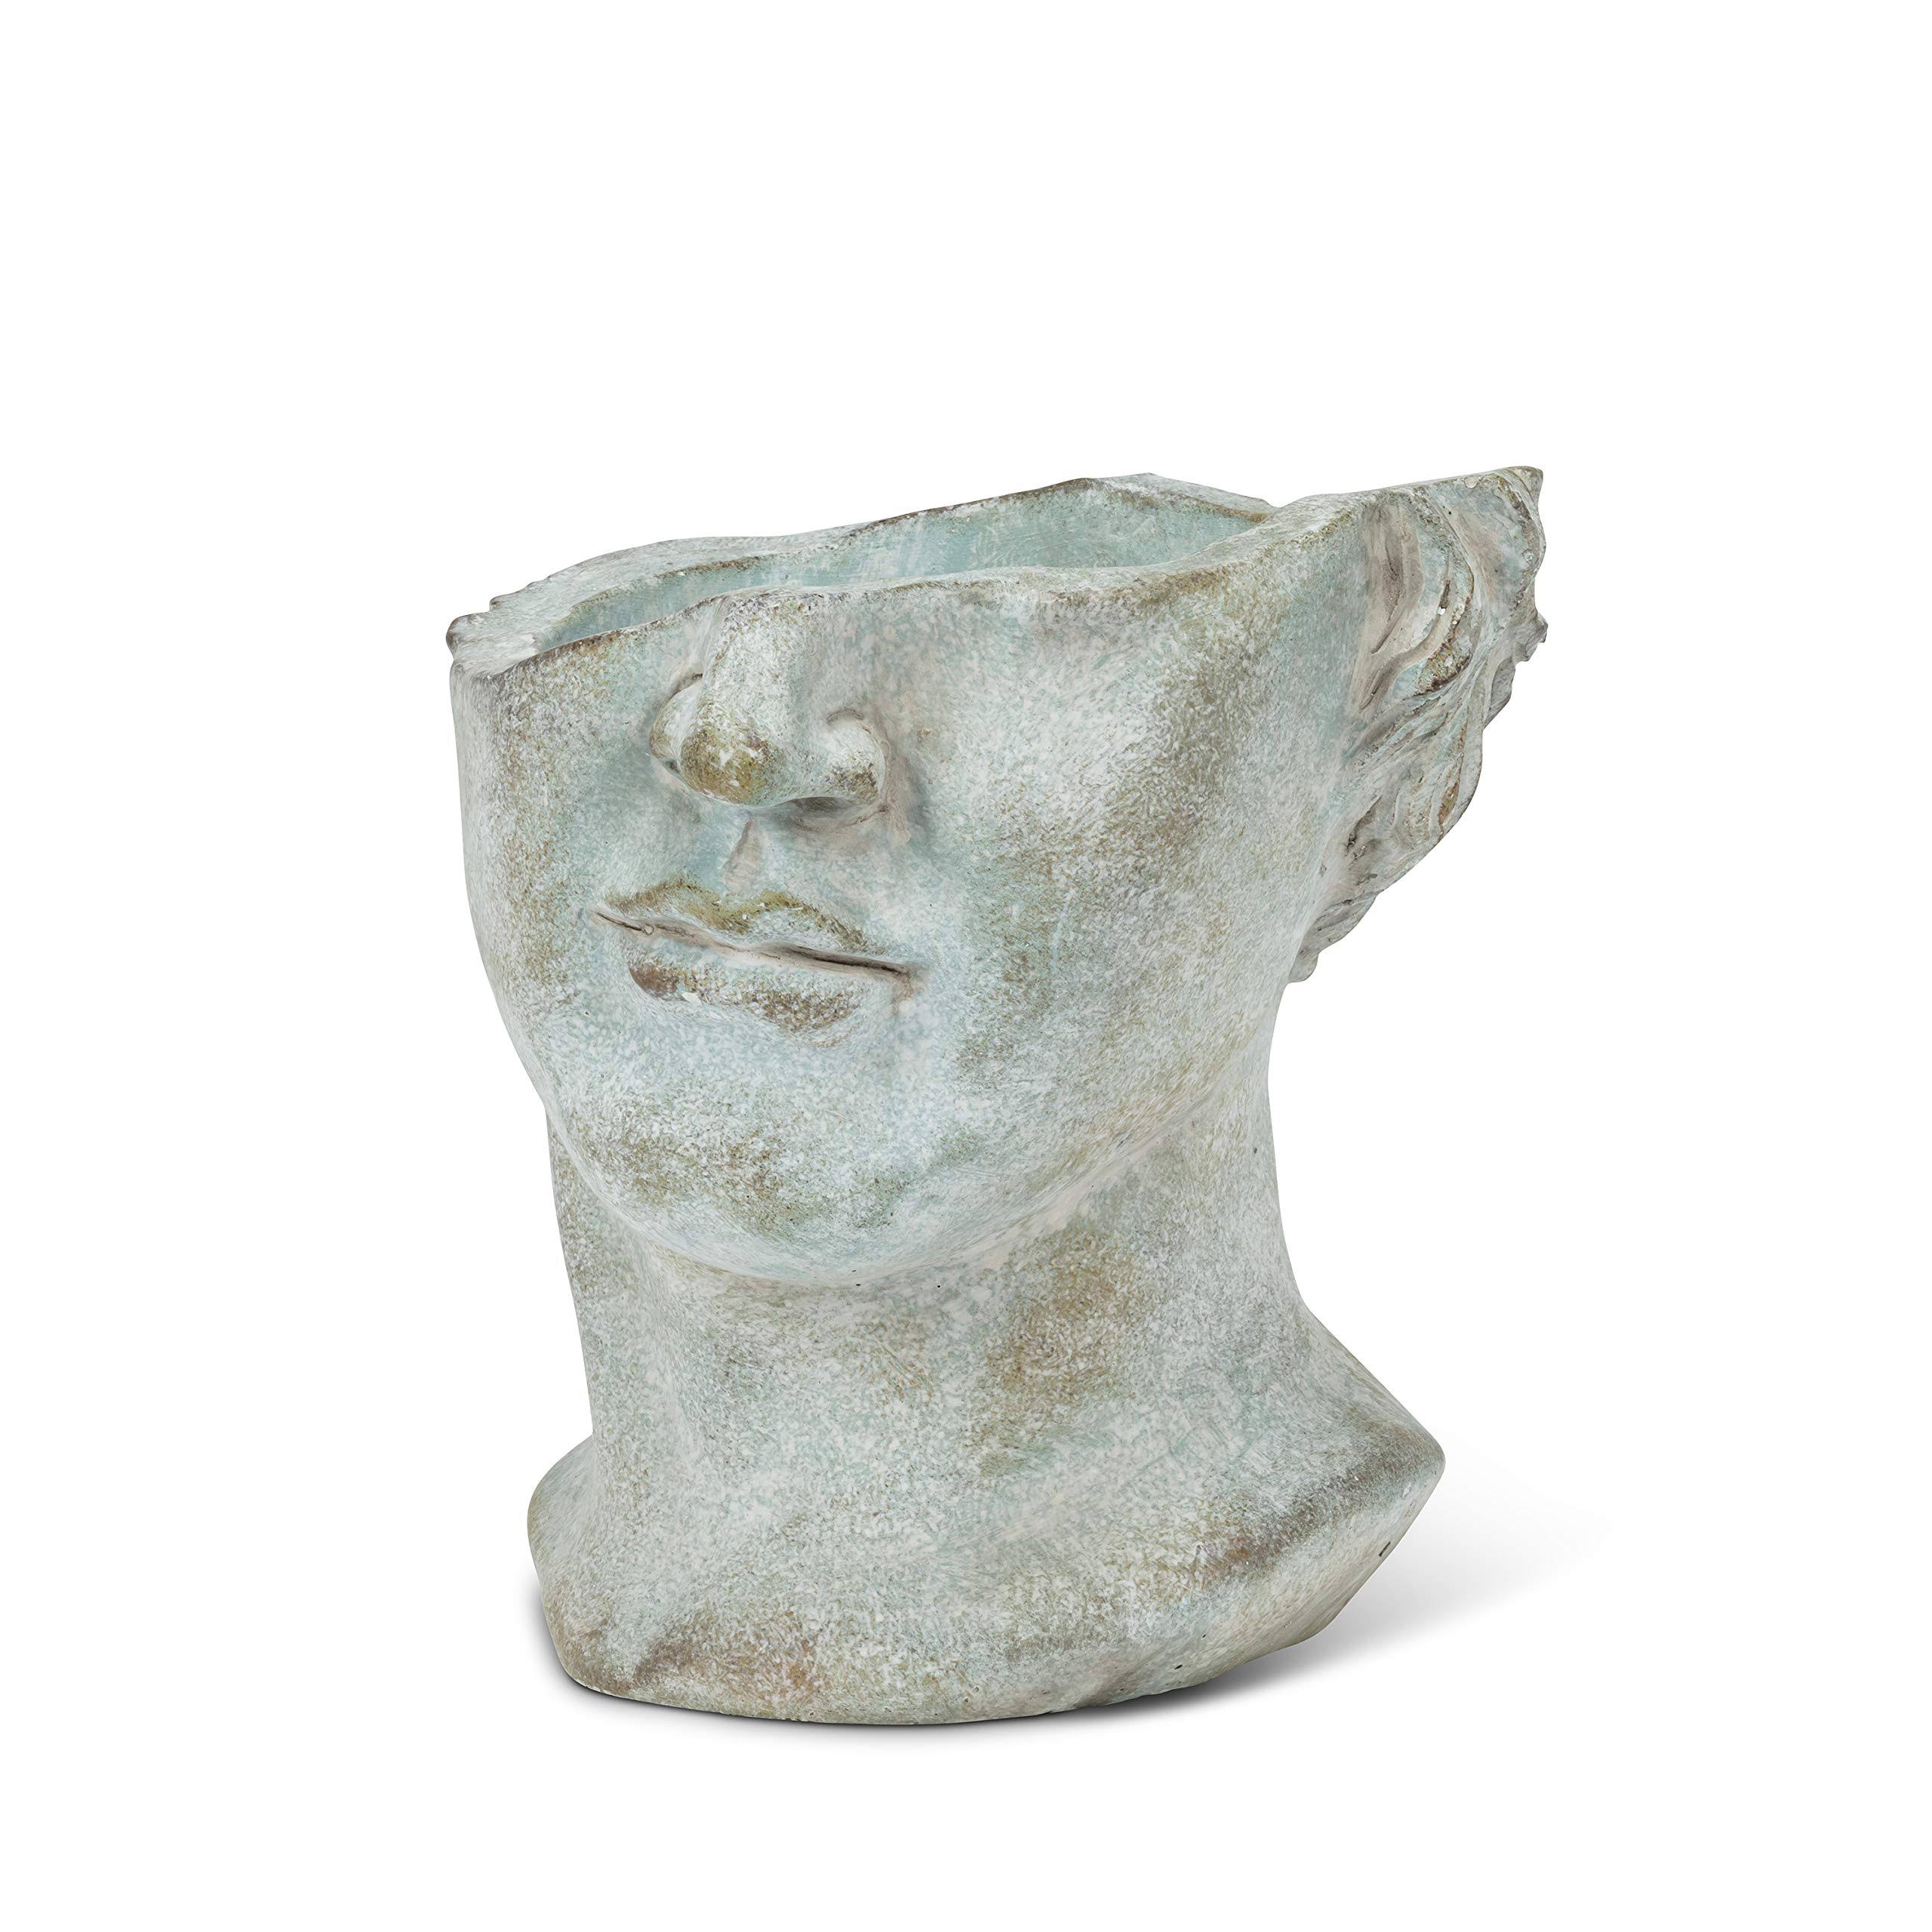 Abbott Collection Home Half Male Face Planter, Grey (27-ATHENS-798)